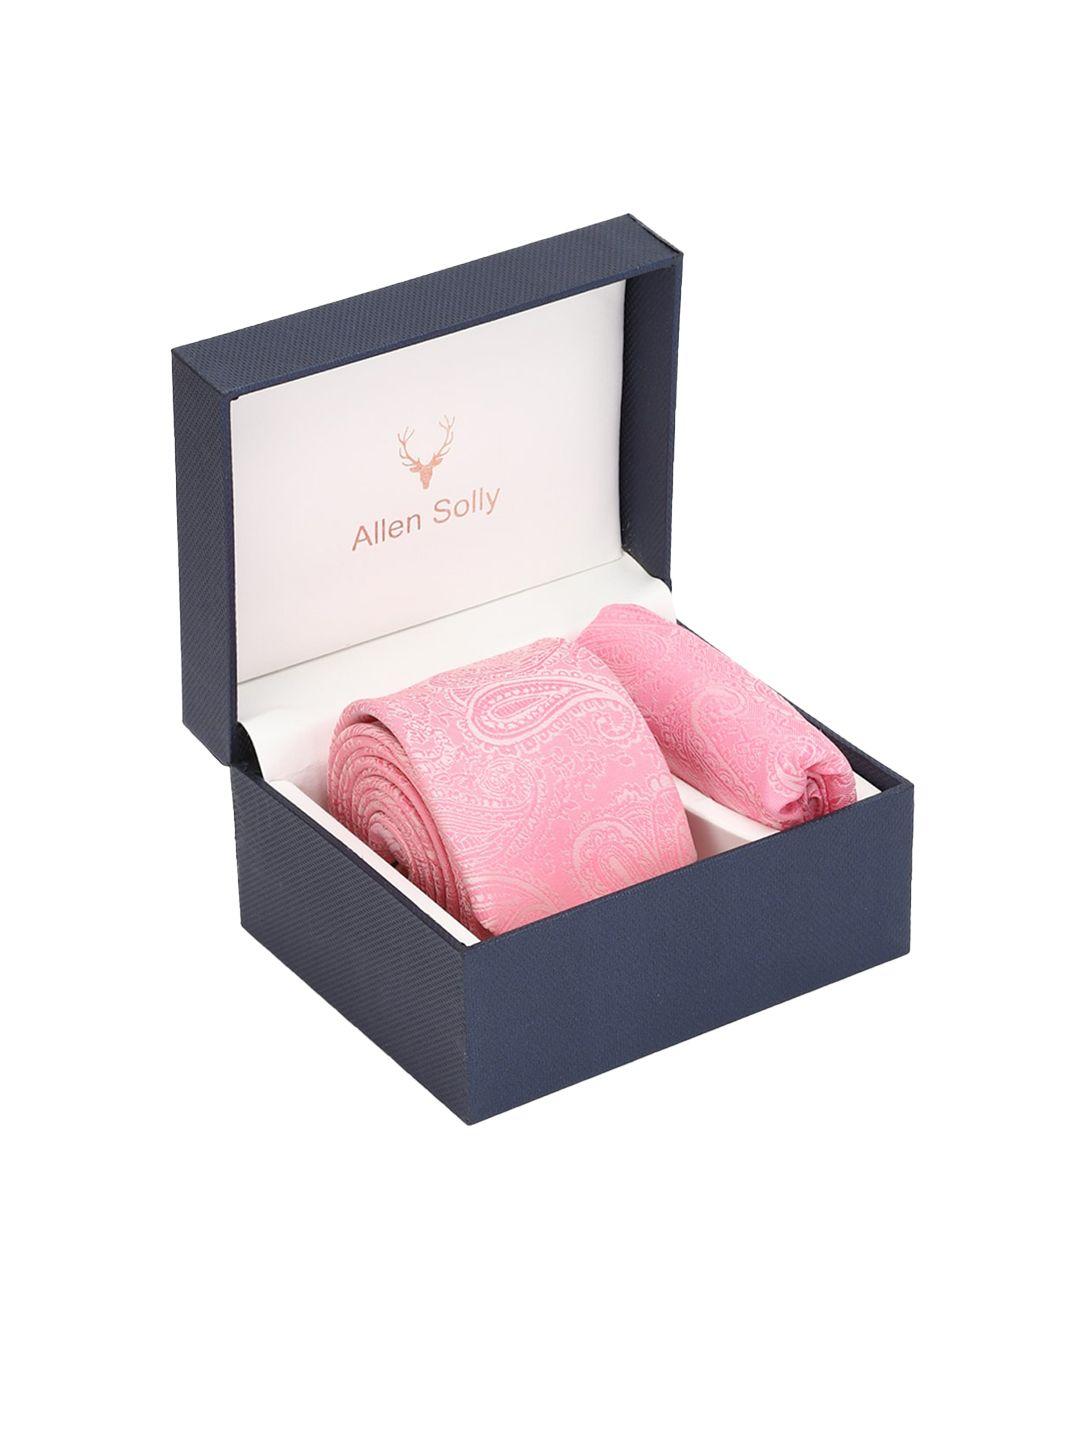 allen solly men pink printed tie and pocket square accessory gift set